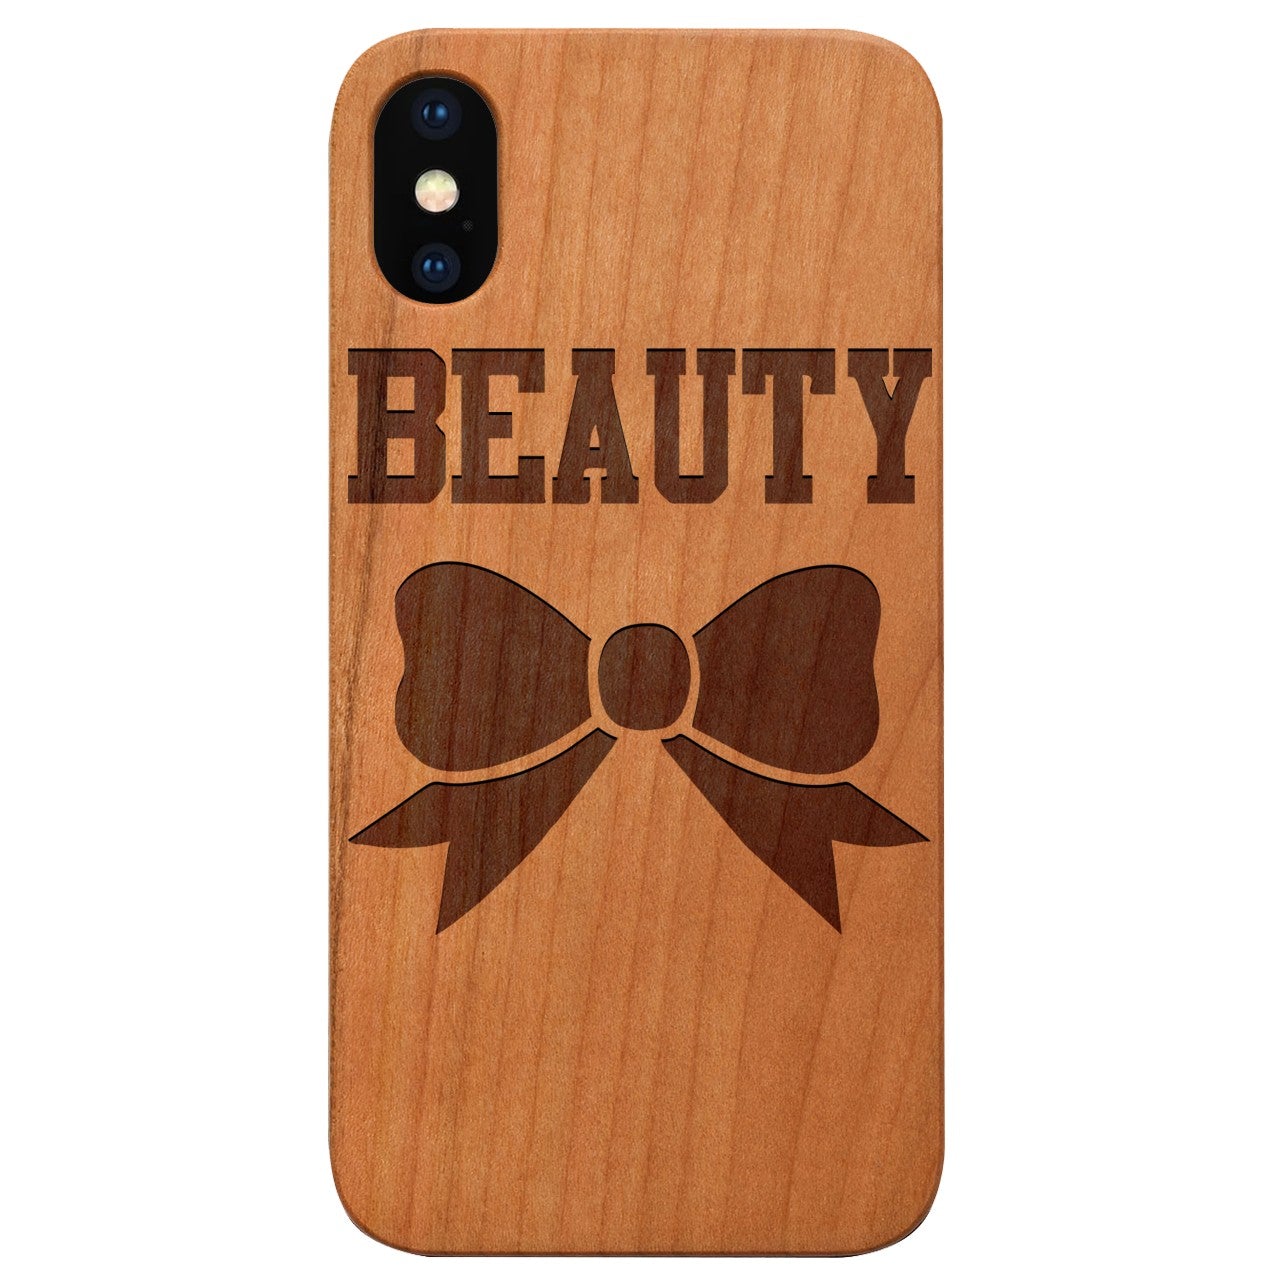  Beauty - Engraved - Wooden Phone Case - IPhone 13 Models